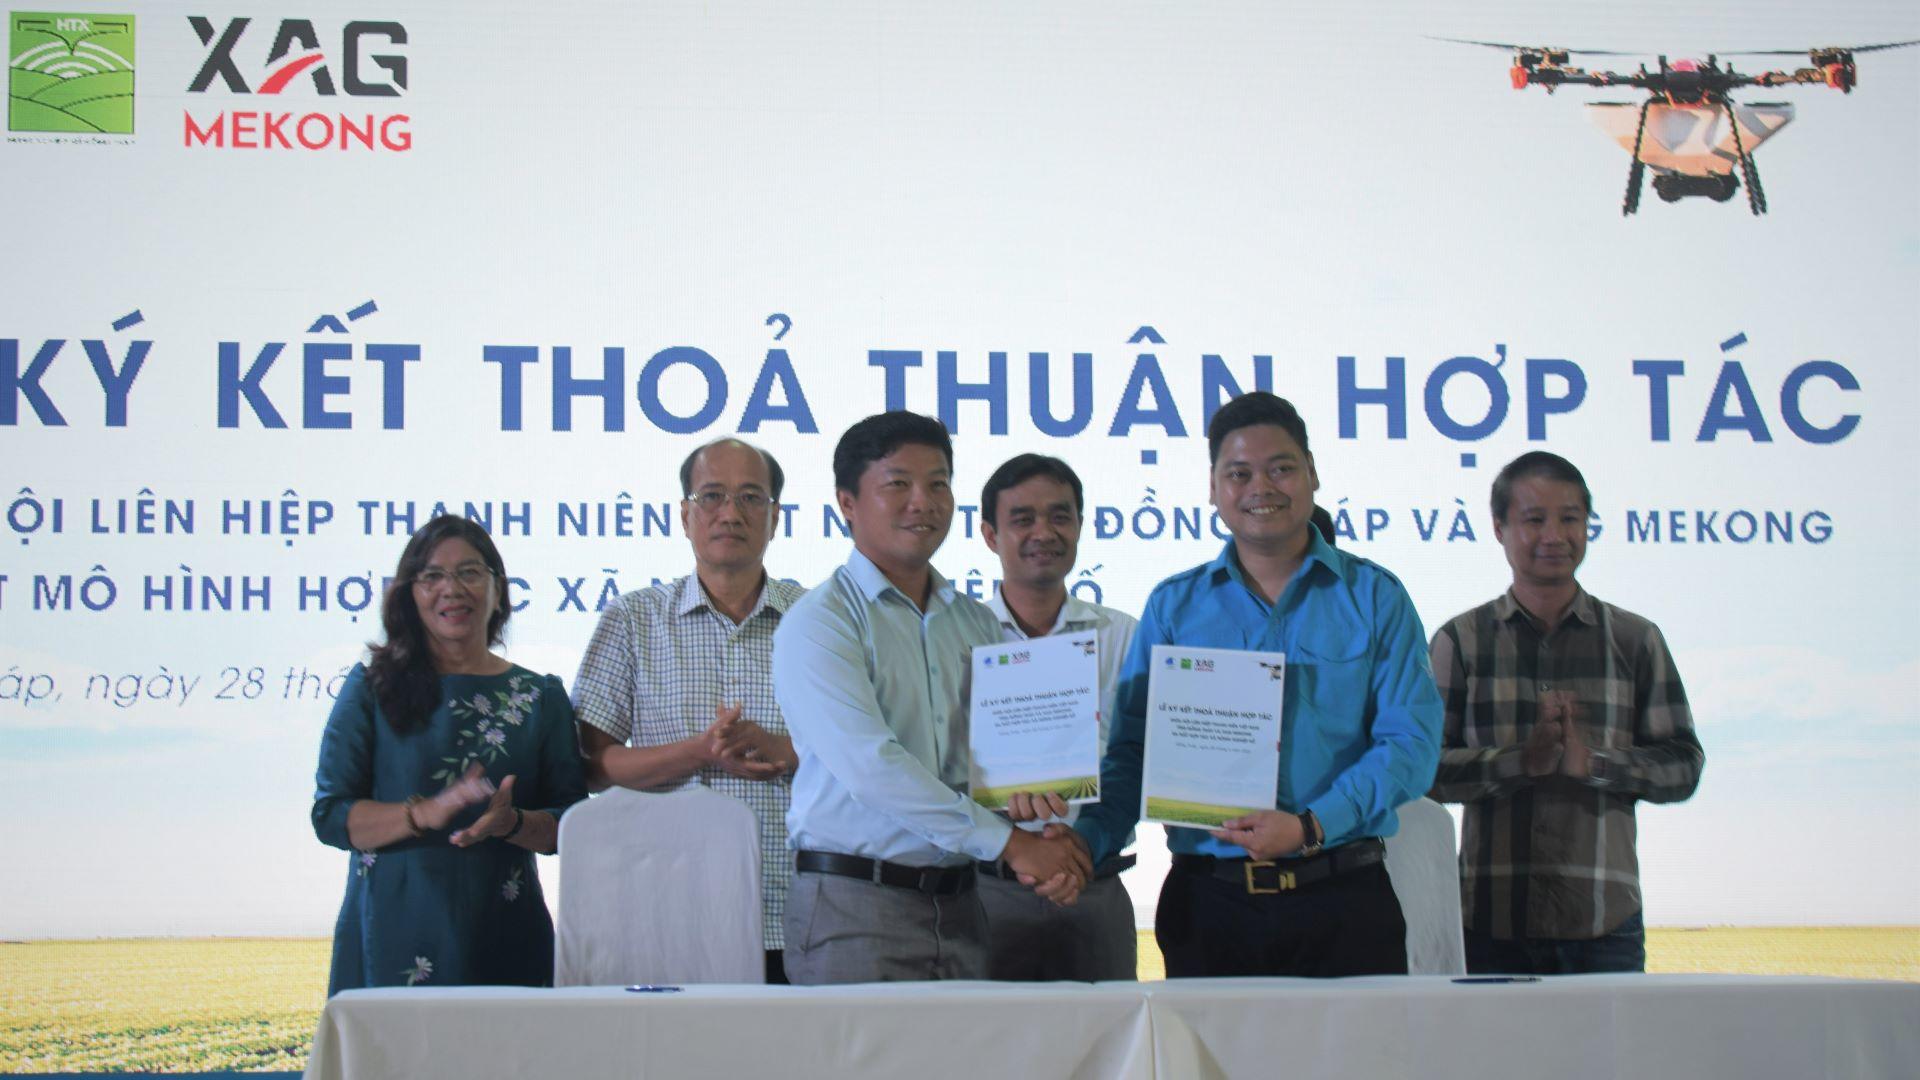 The Dong Thap Digital Agricultural Cooperative was announced to establish